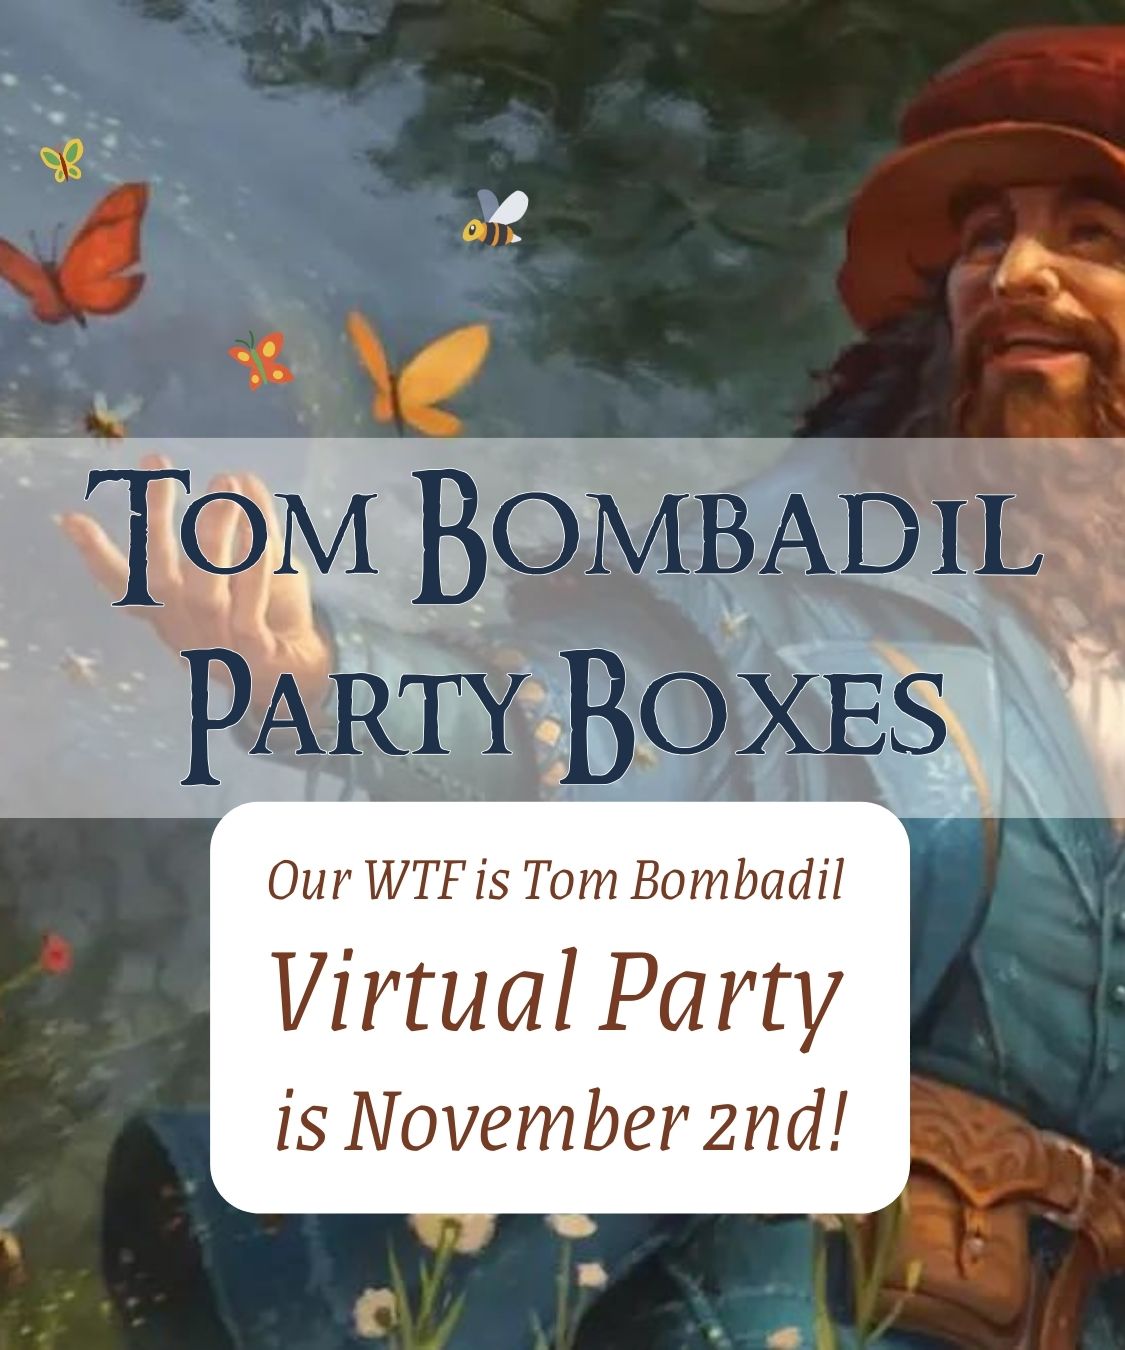 Tom Bombadil Party Boxes - Virtual Tolkien Party November 2nd!